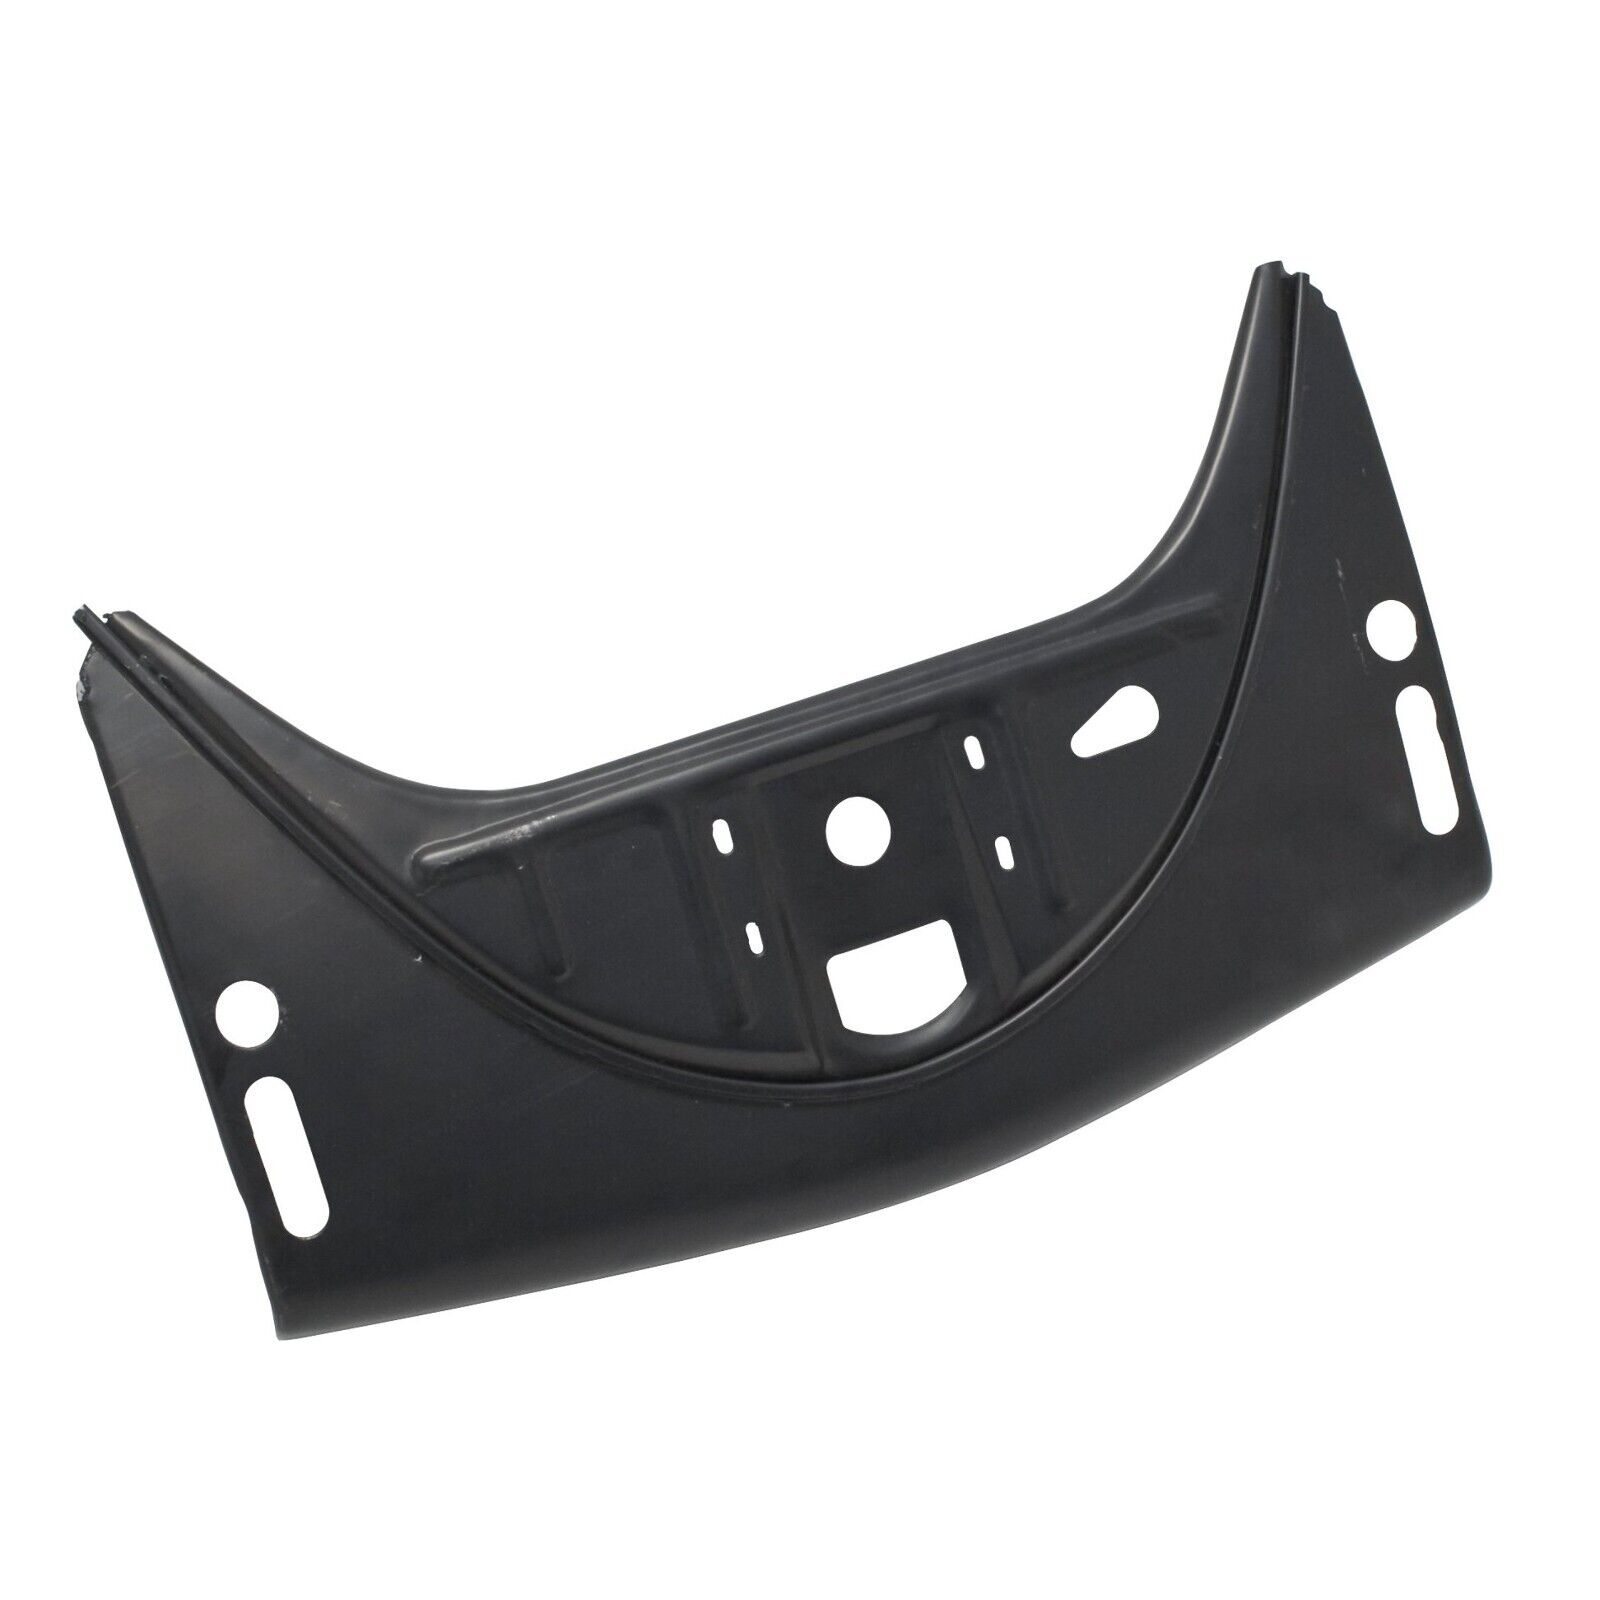 Front Apron Body Panel with Bumper Overrider Holes for 1958-67 Type 1 VW Beetle